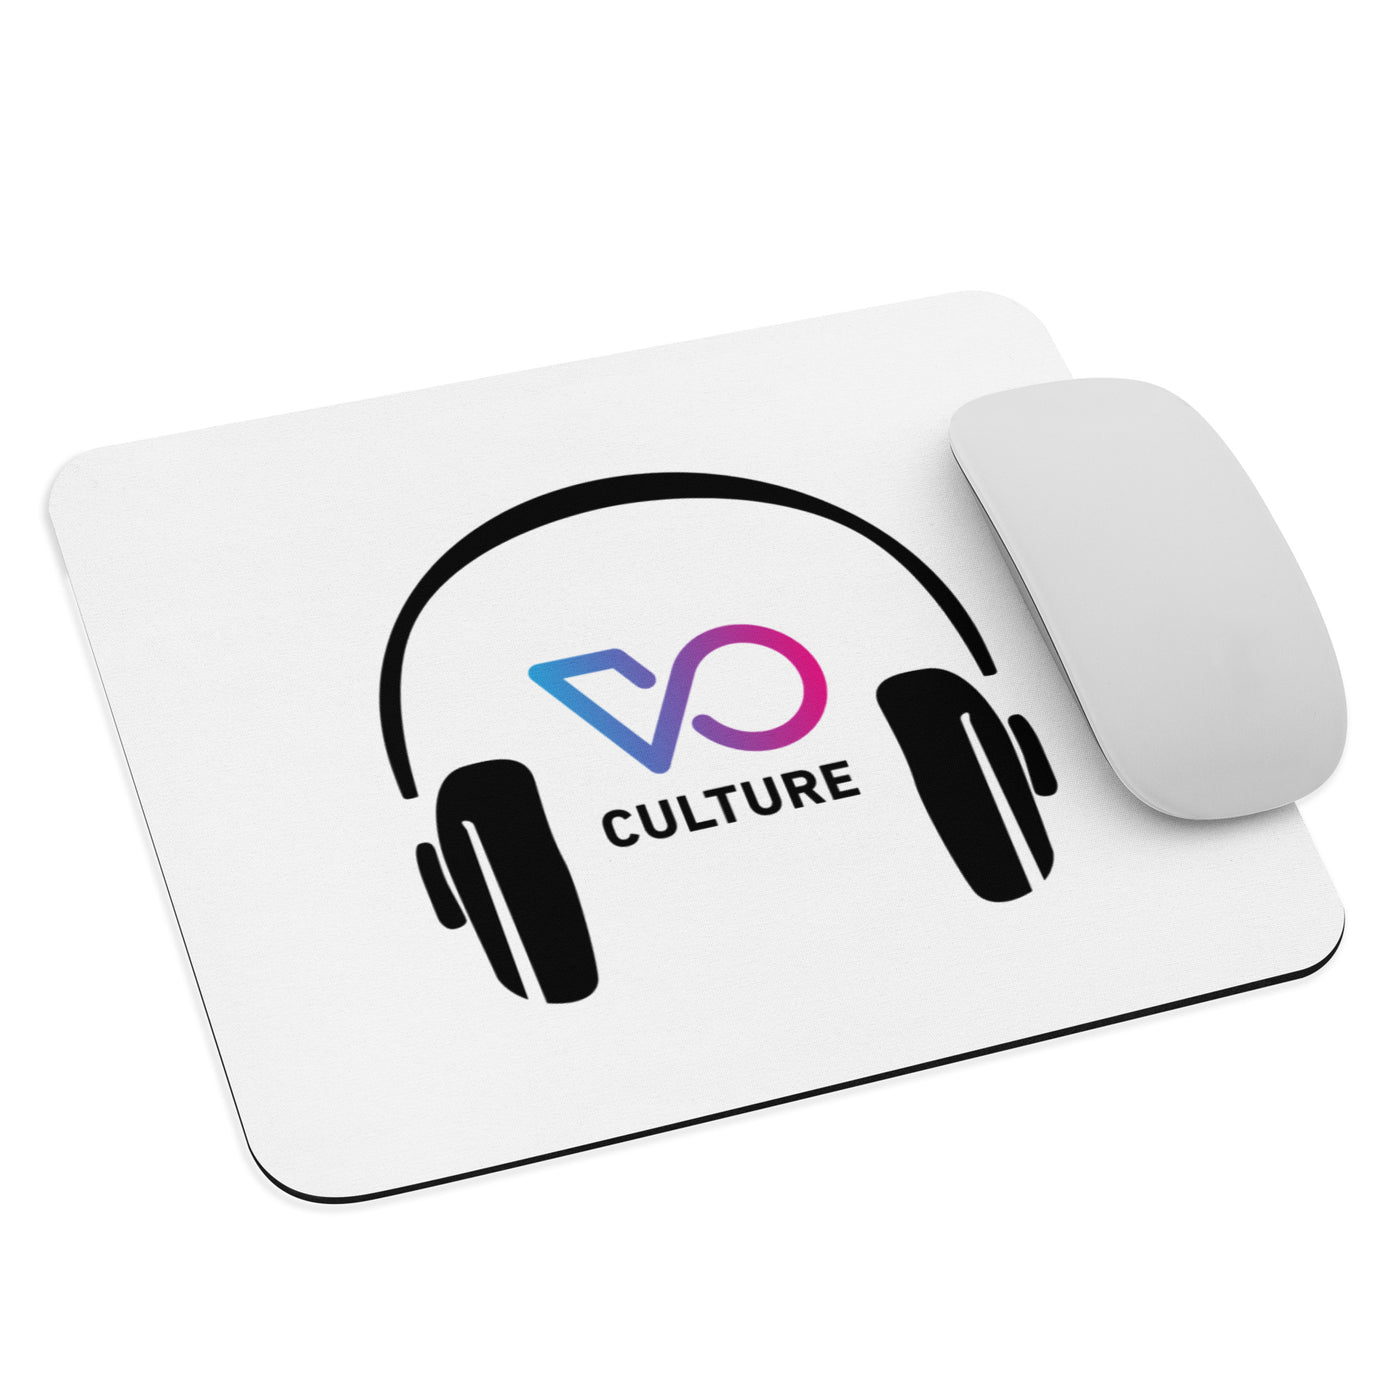 VO Culture Headphones Mouse pad white